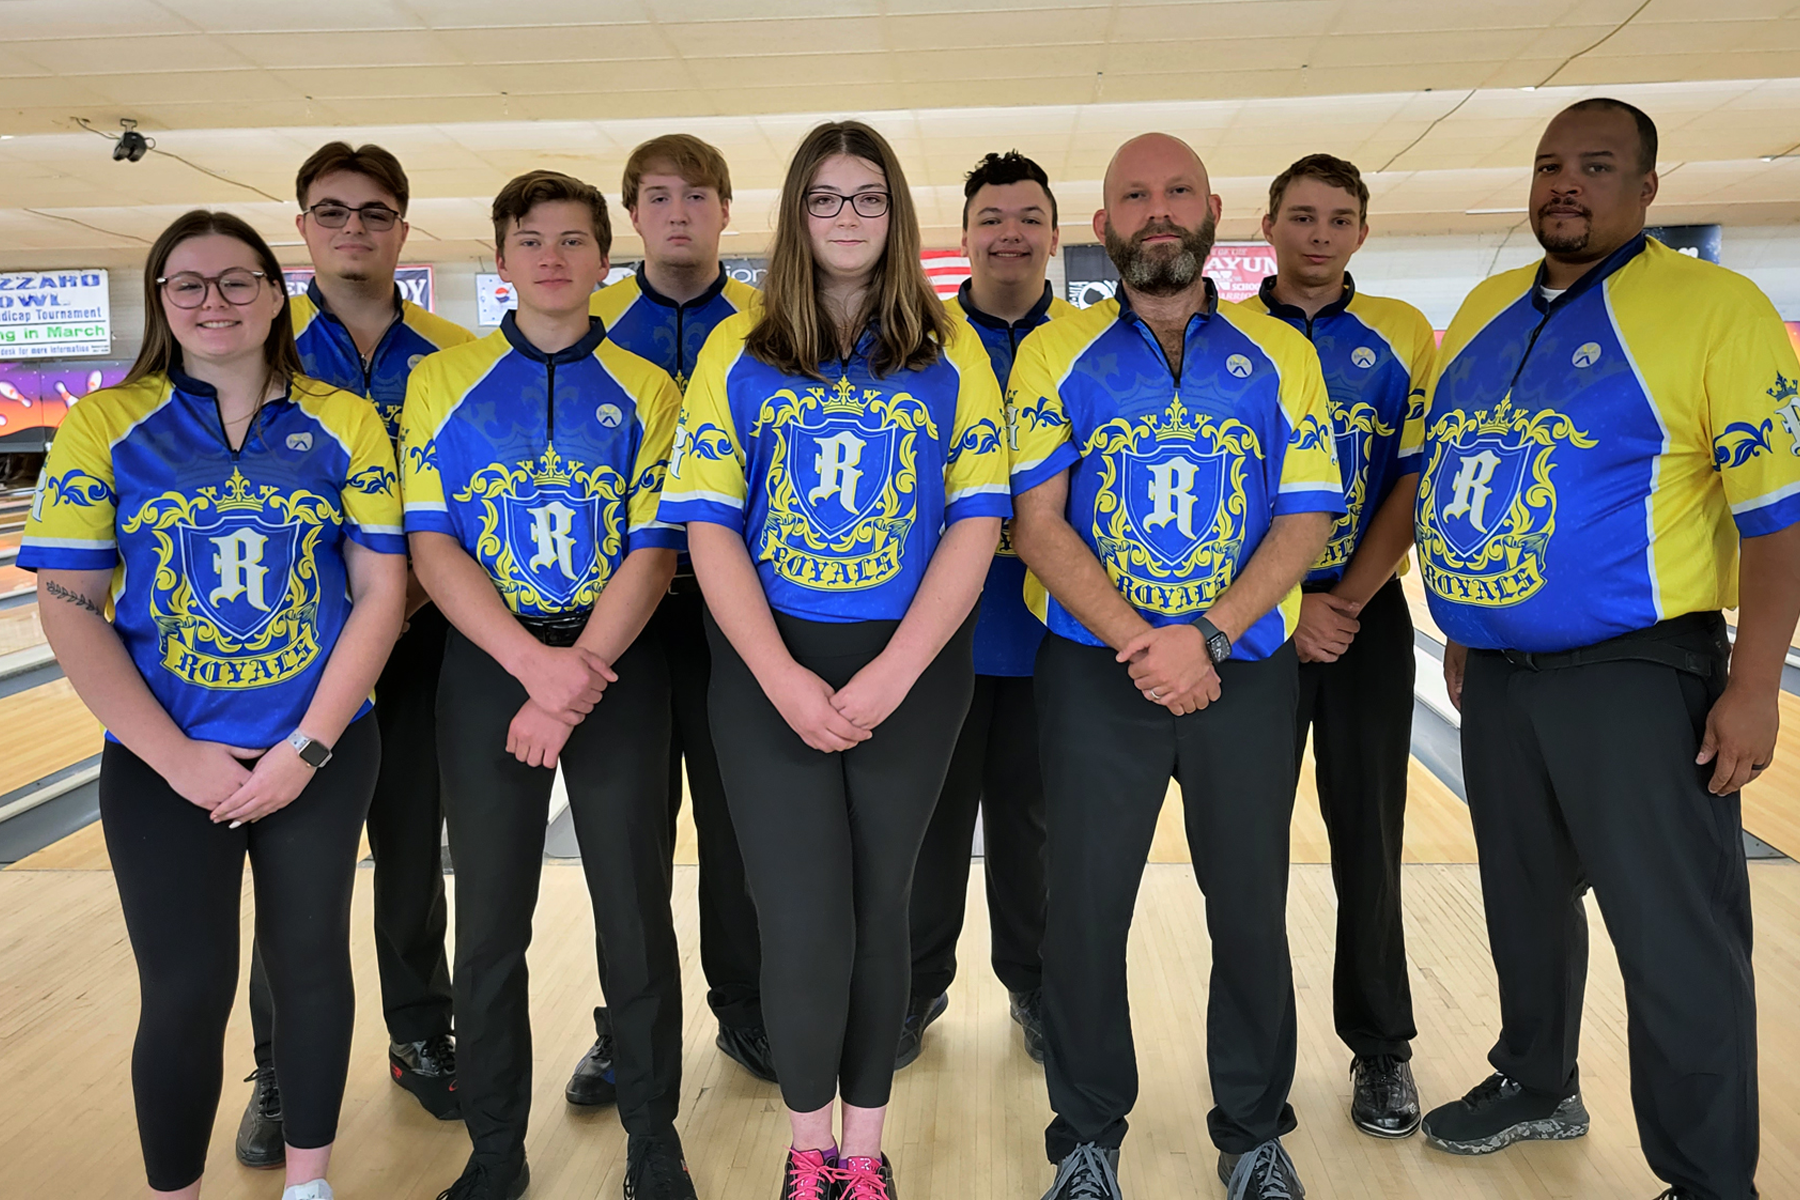 Bowling Team standing in front of lanes at Boulevard Bowl